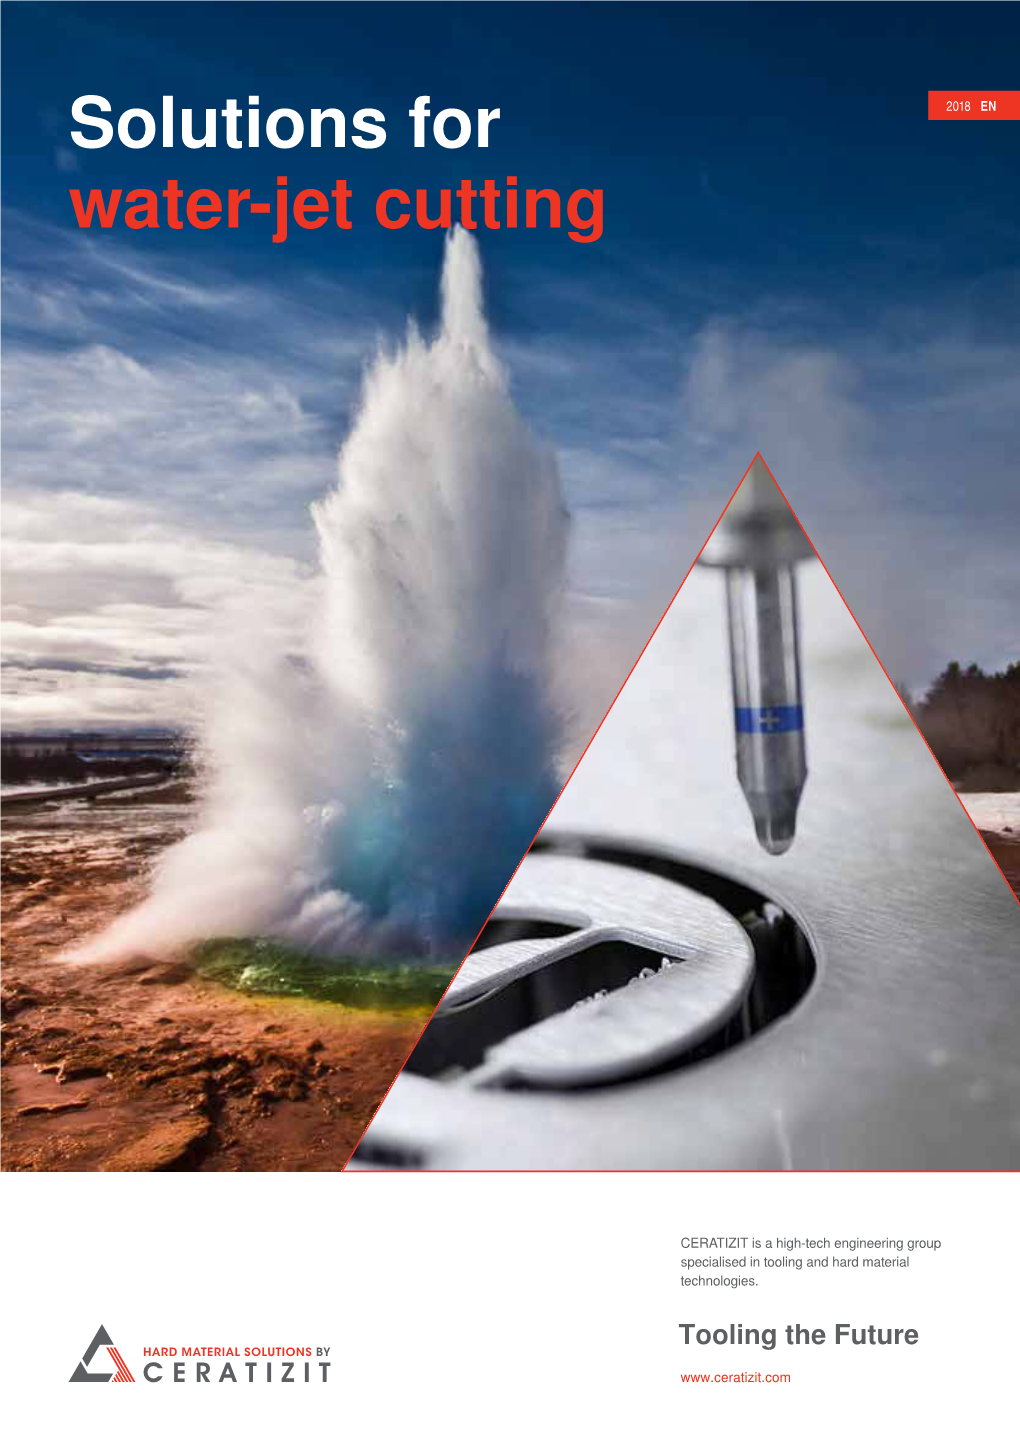 Solutions for Water-Jet Cutting